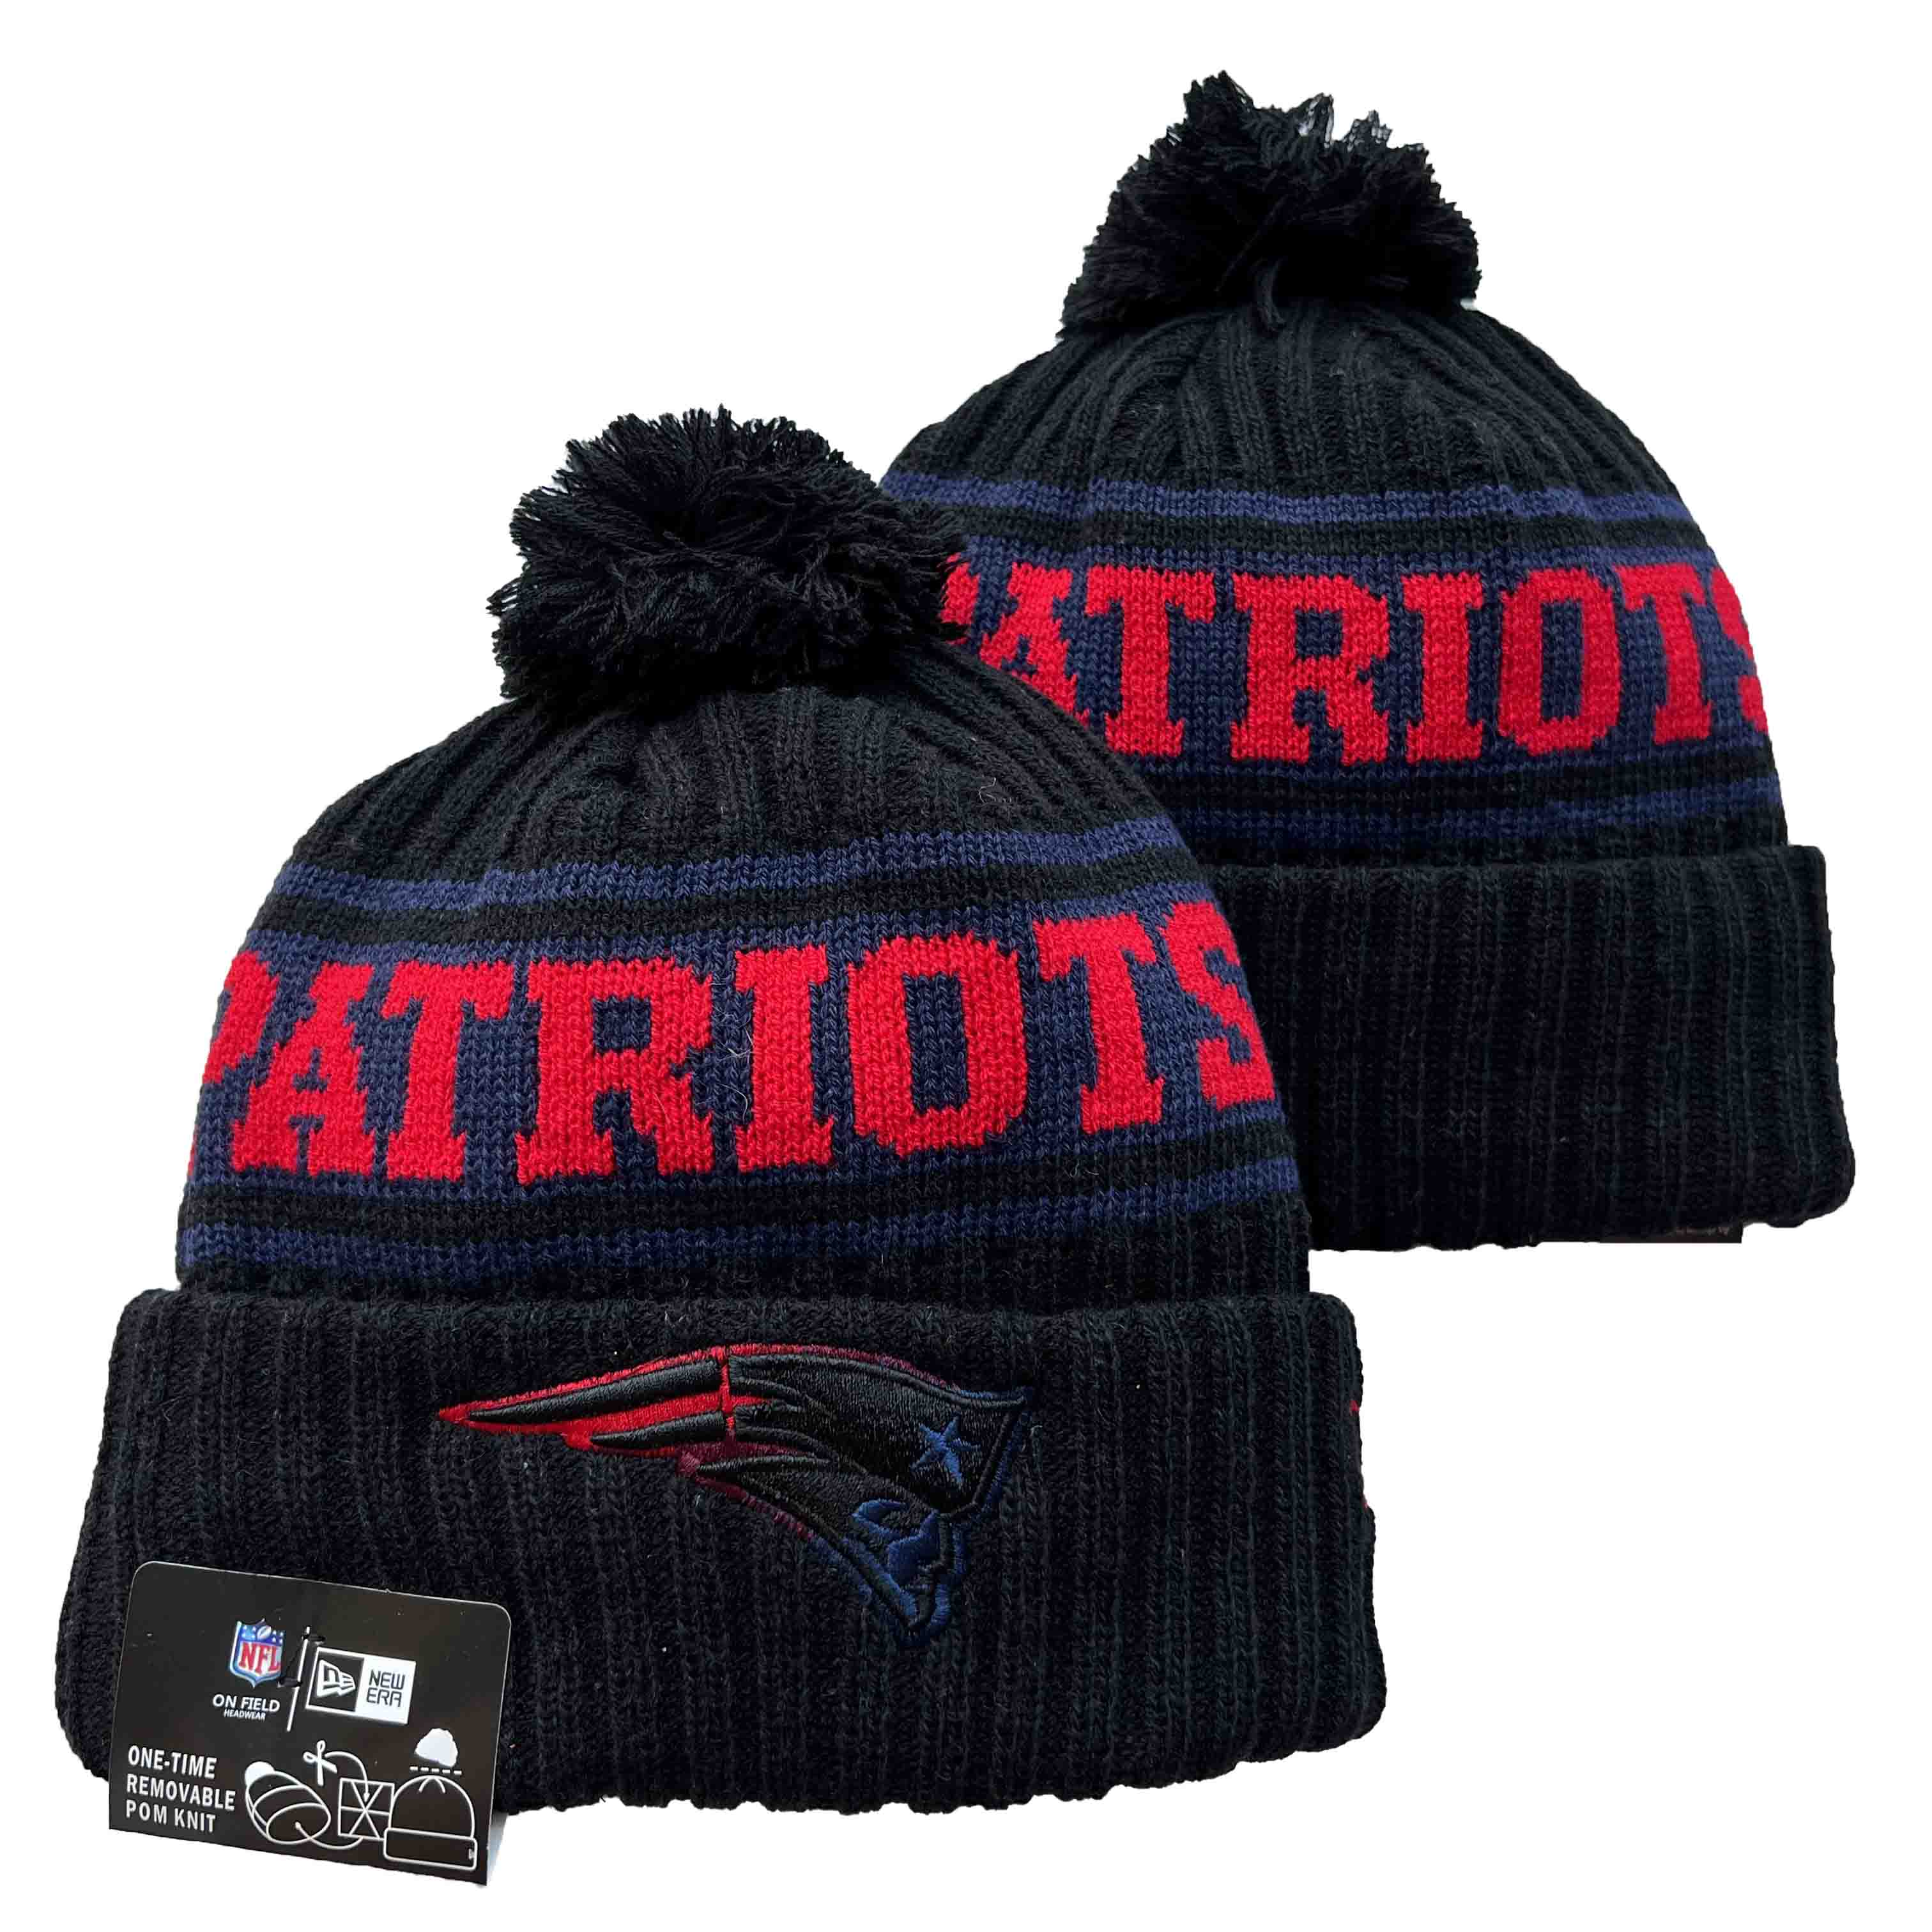 NFL New England Patriots Beanies Knit Hats-YD1257